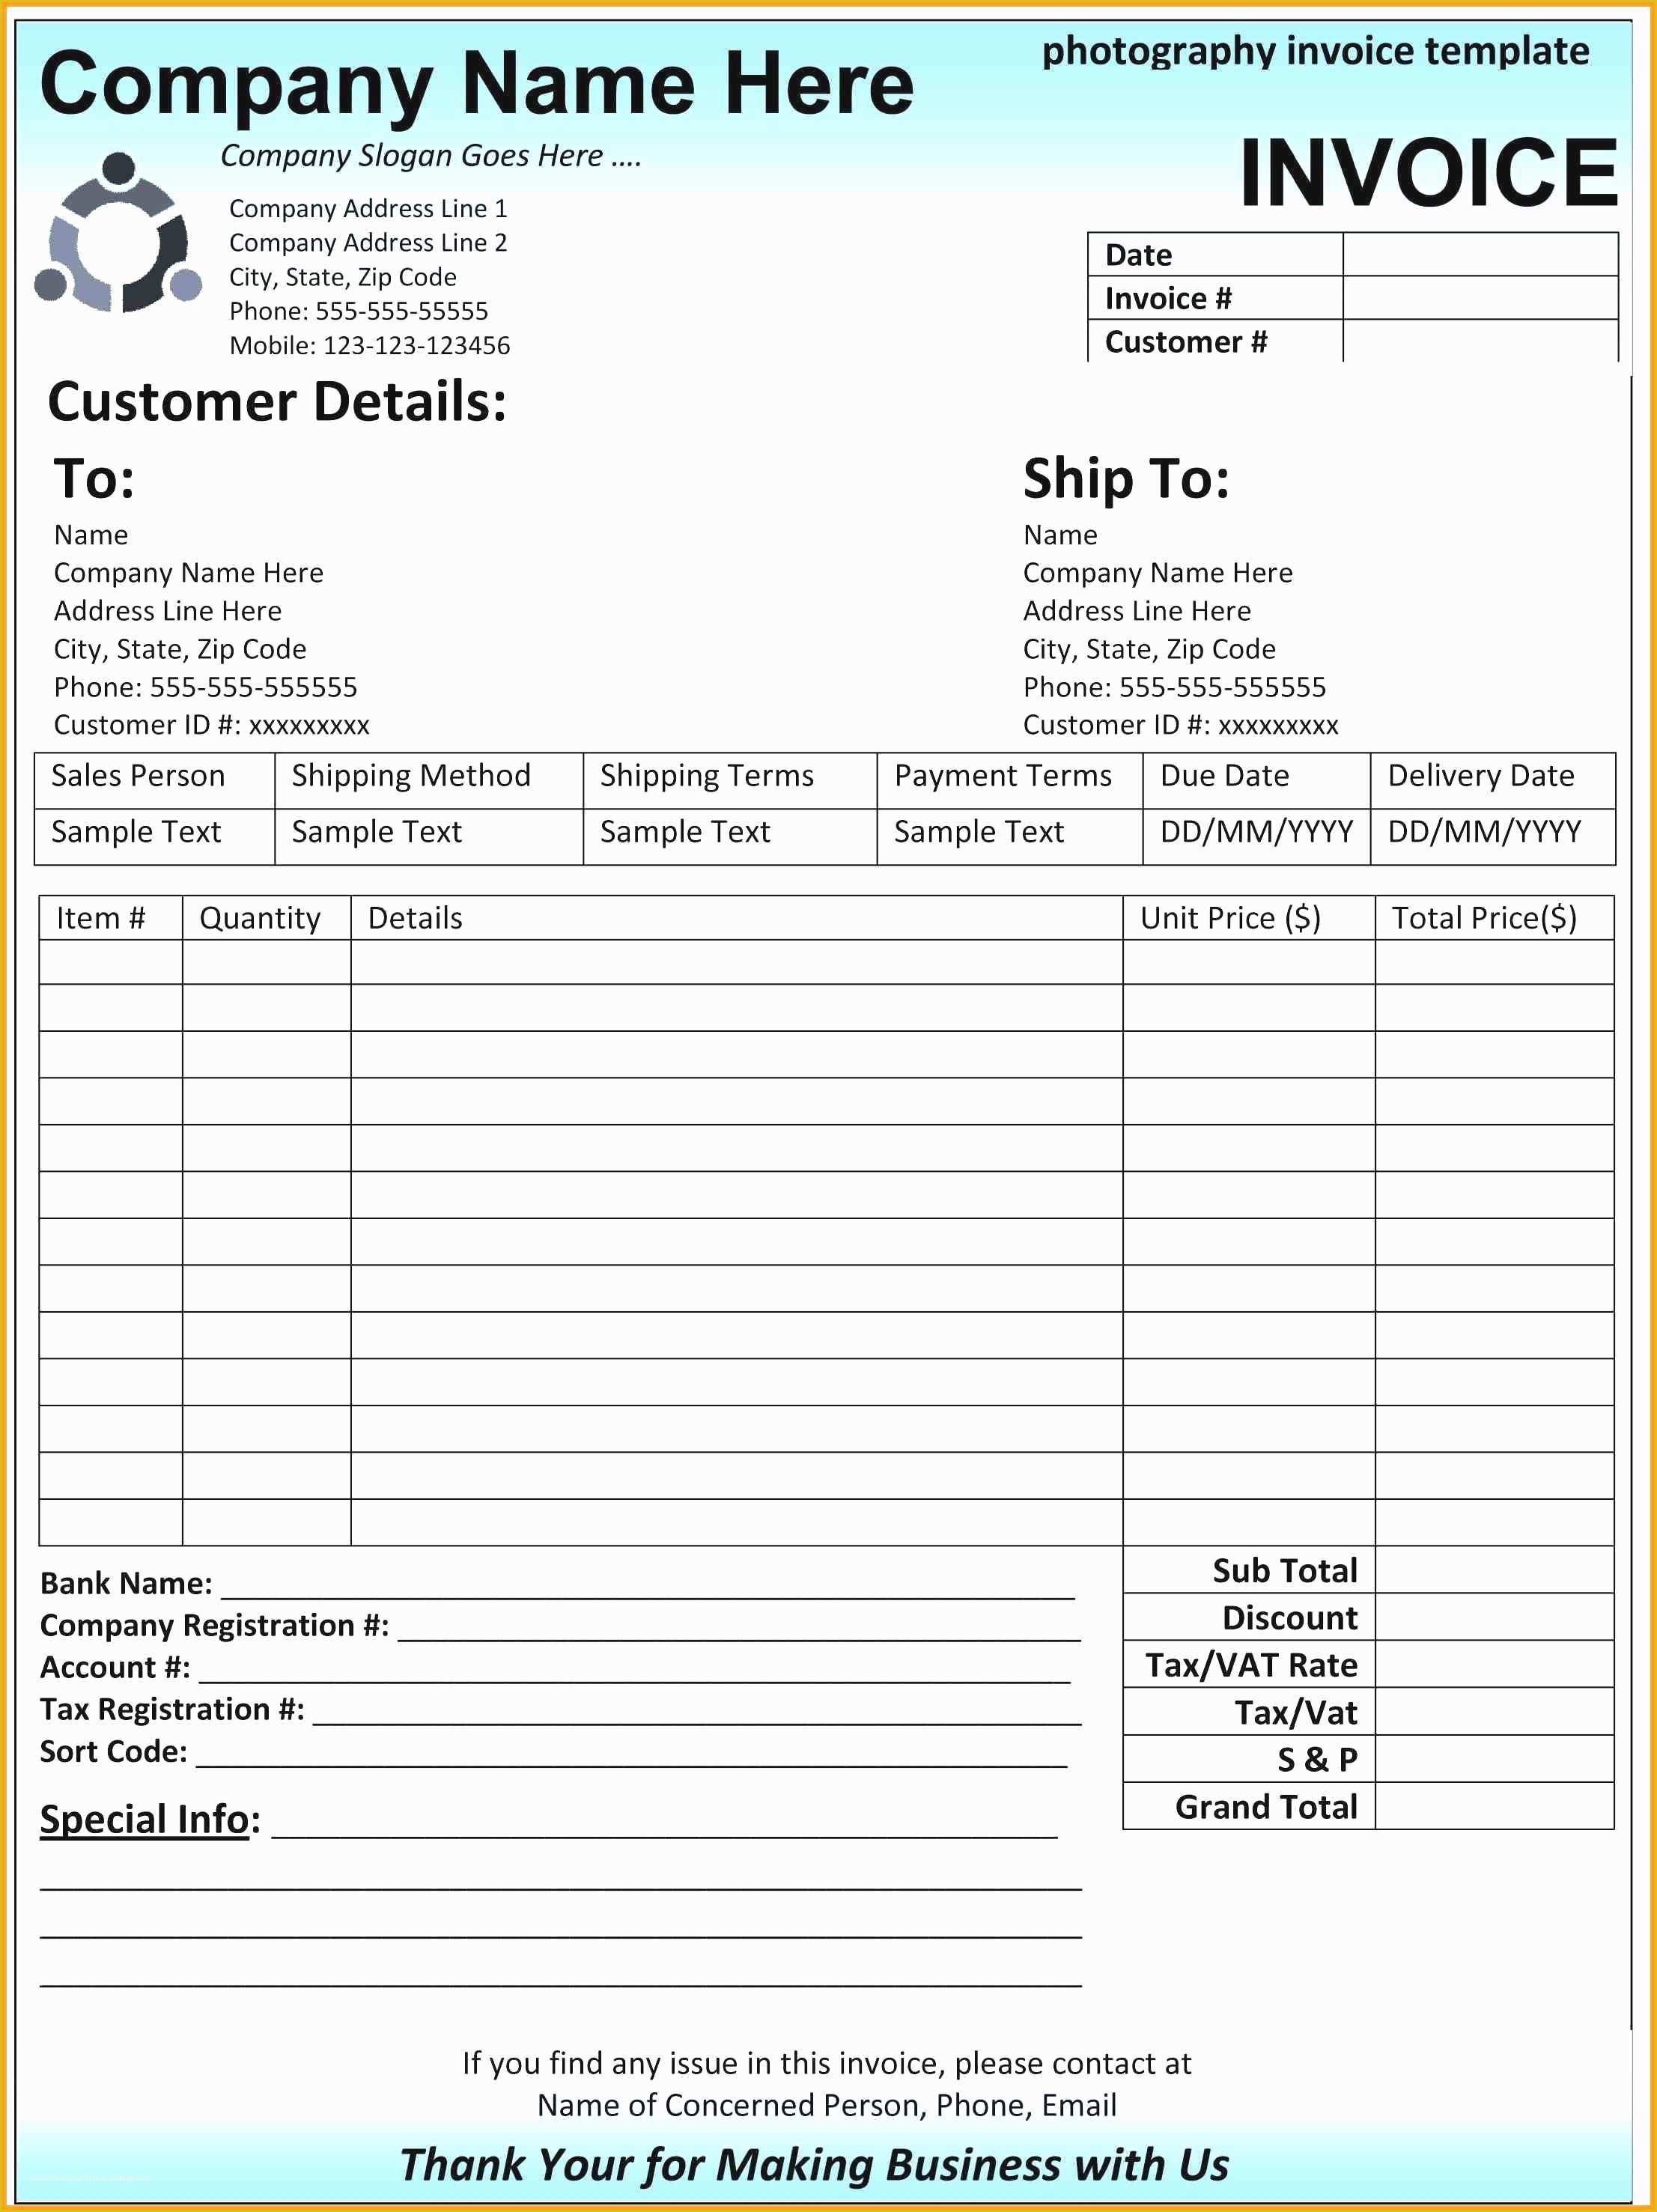 Free Excel Invoice Template Mac Of Mac Invoice Template Excel the Latest Trend In Mac Invoice